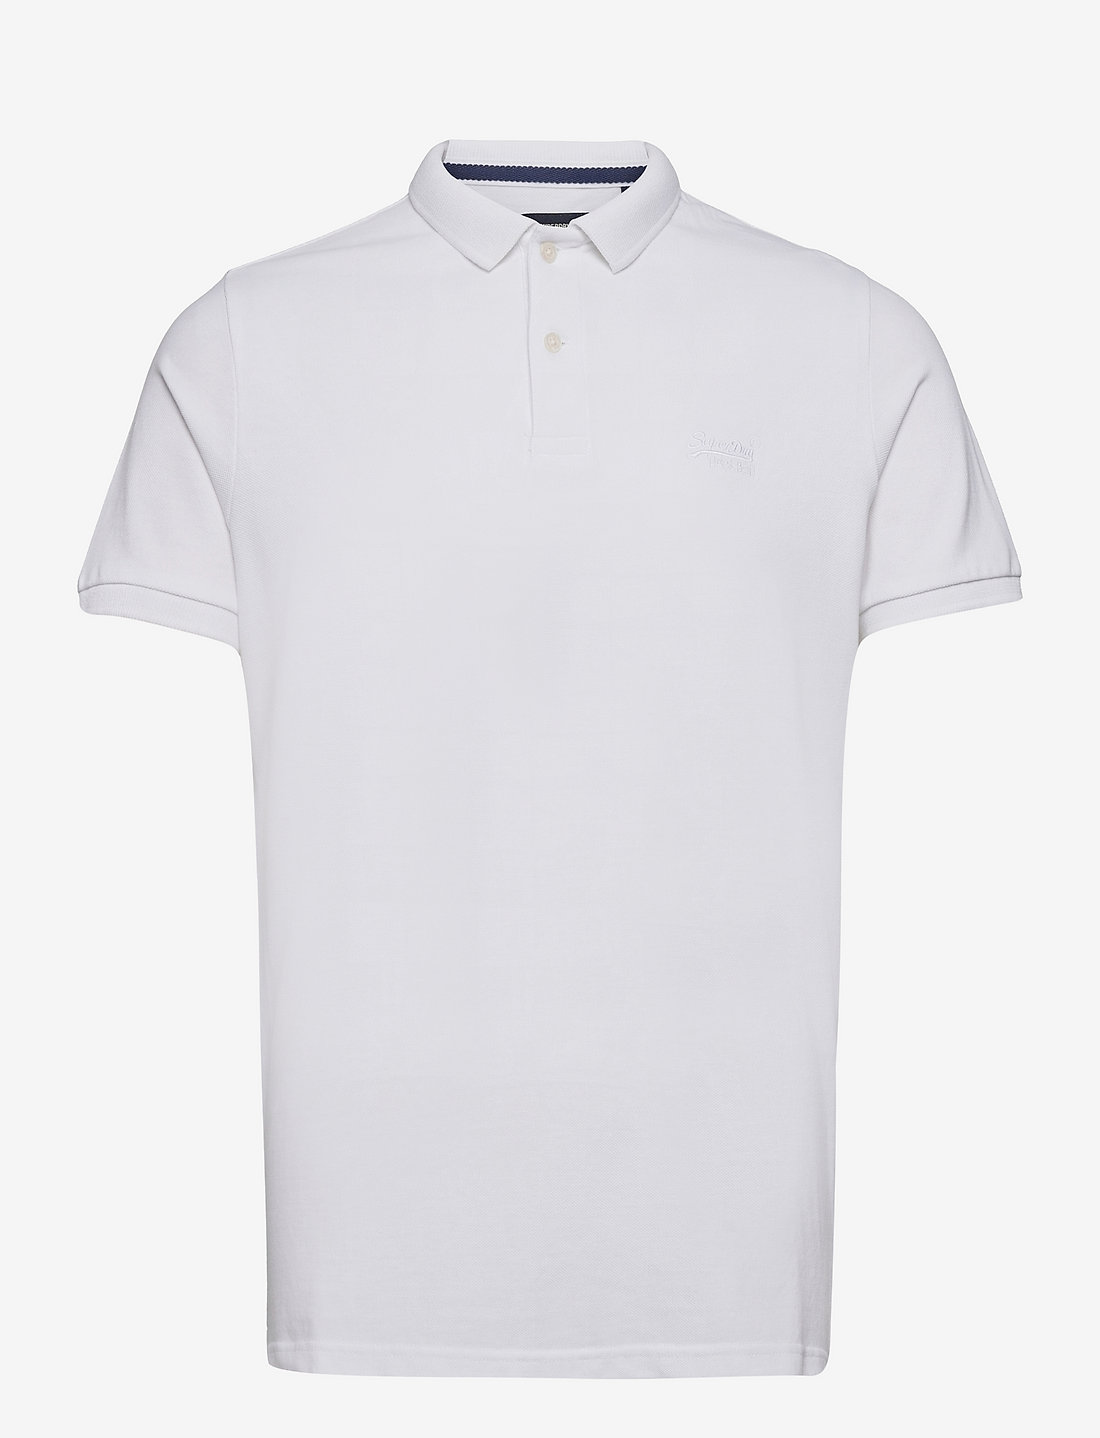 Superdry Classic Pique Polo – polo shirts – shop at Booztlet